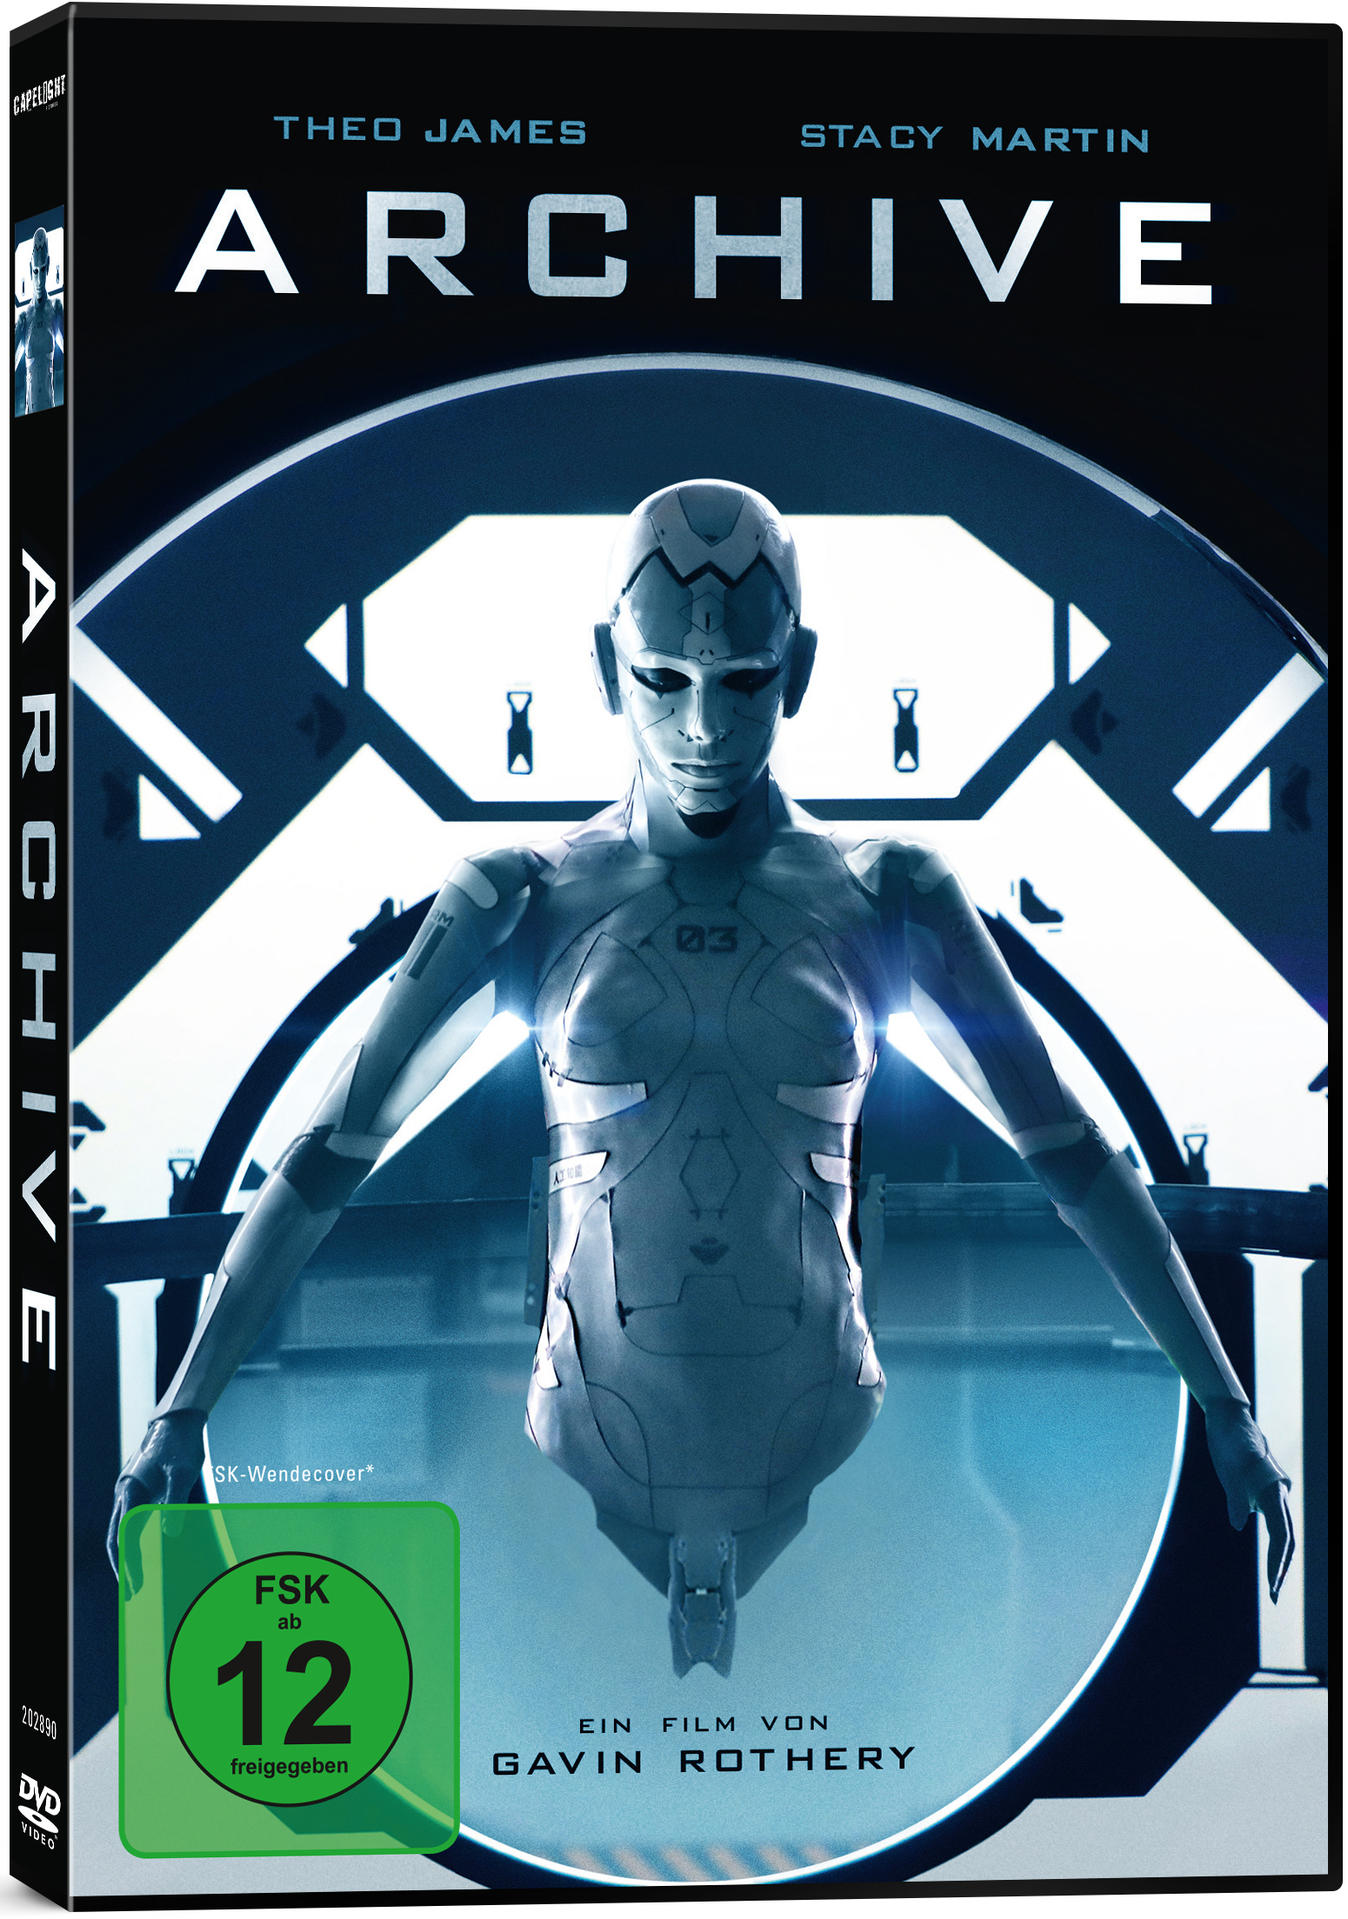 Archive DVD